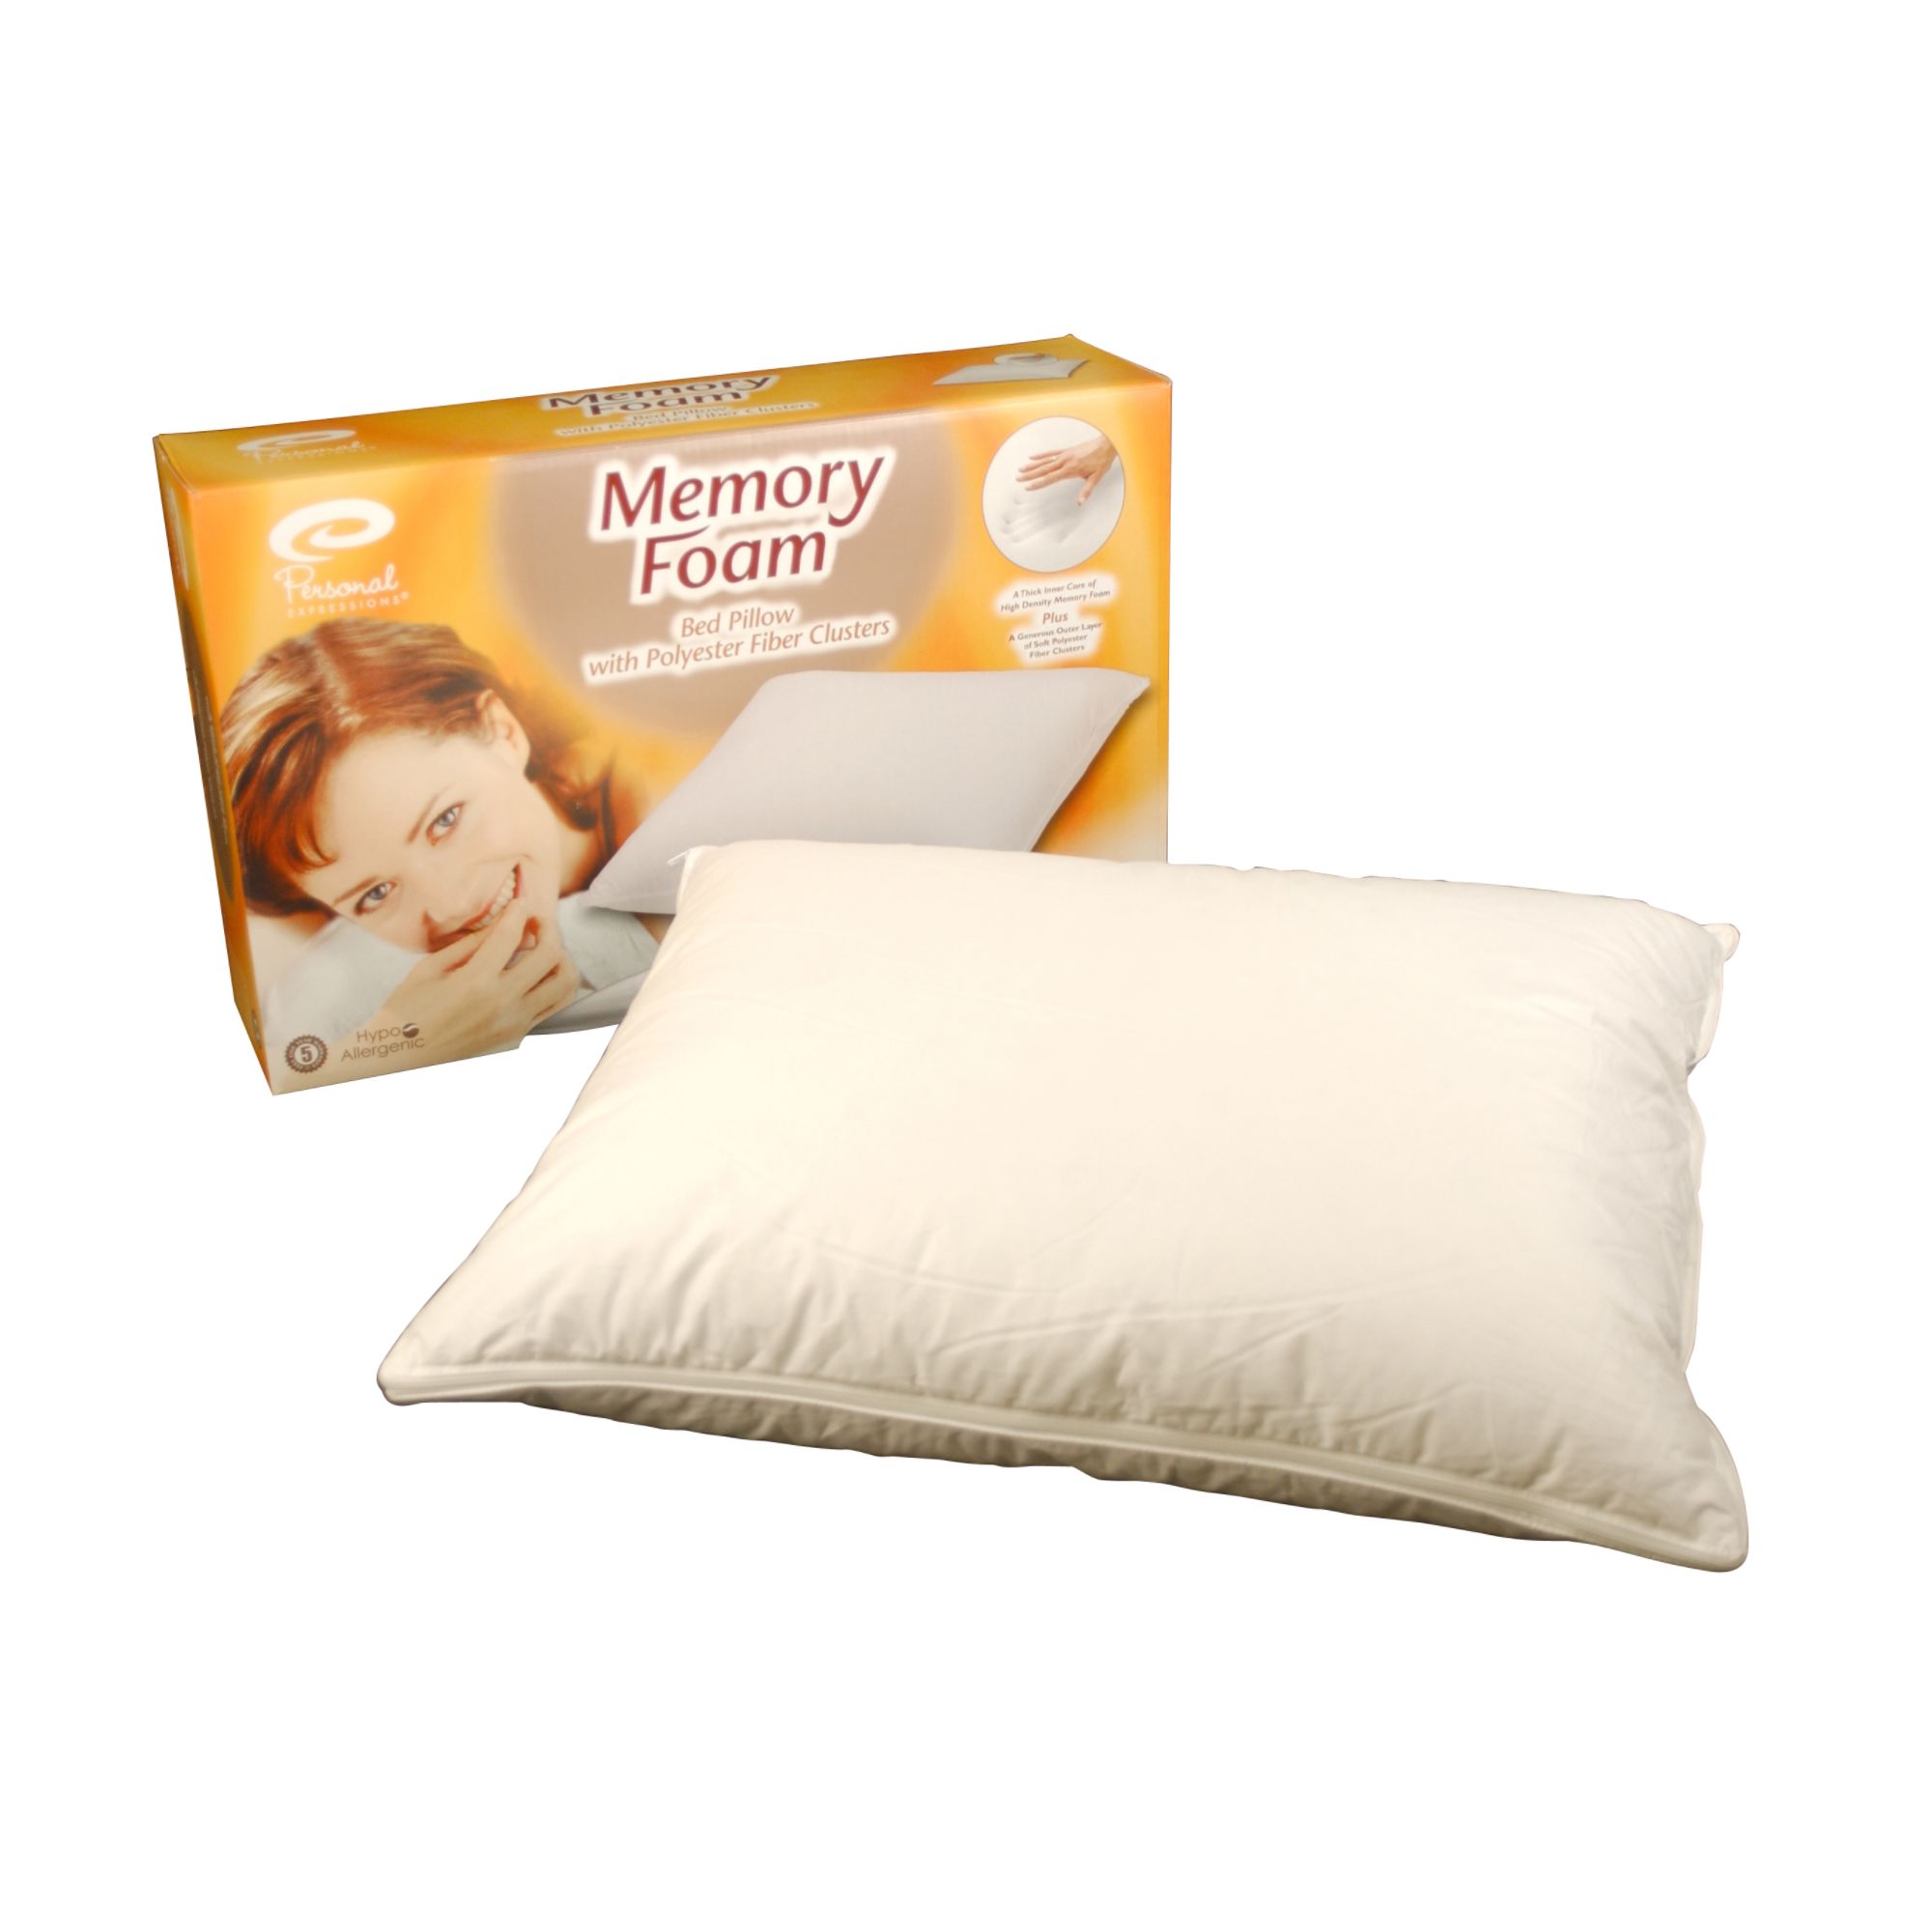 Personal Expressions Memory Foam Pillow with Fiber Clusters